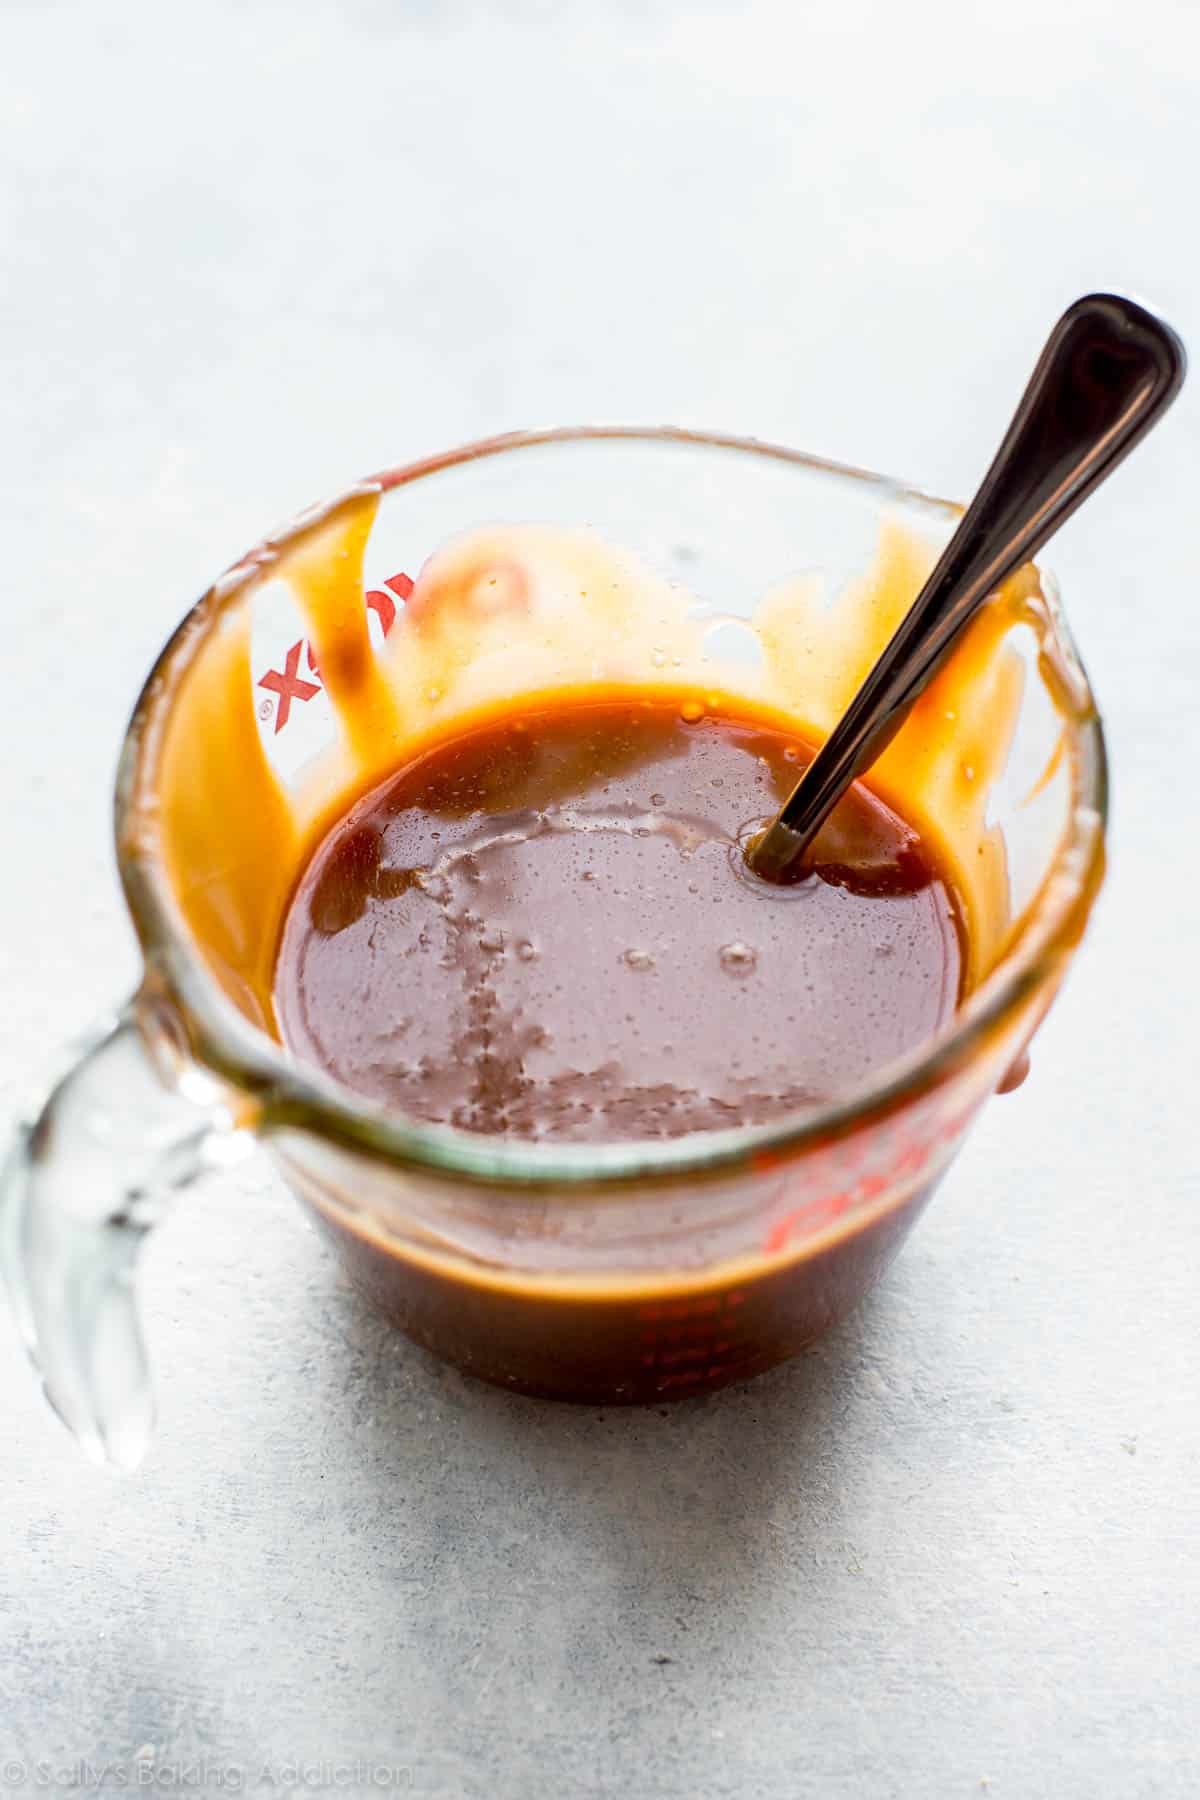 salted caramel in a glass measuring cup with a spoon